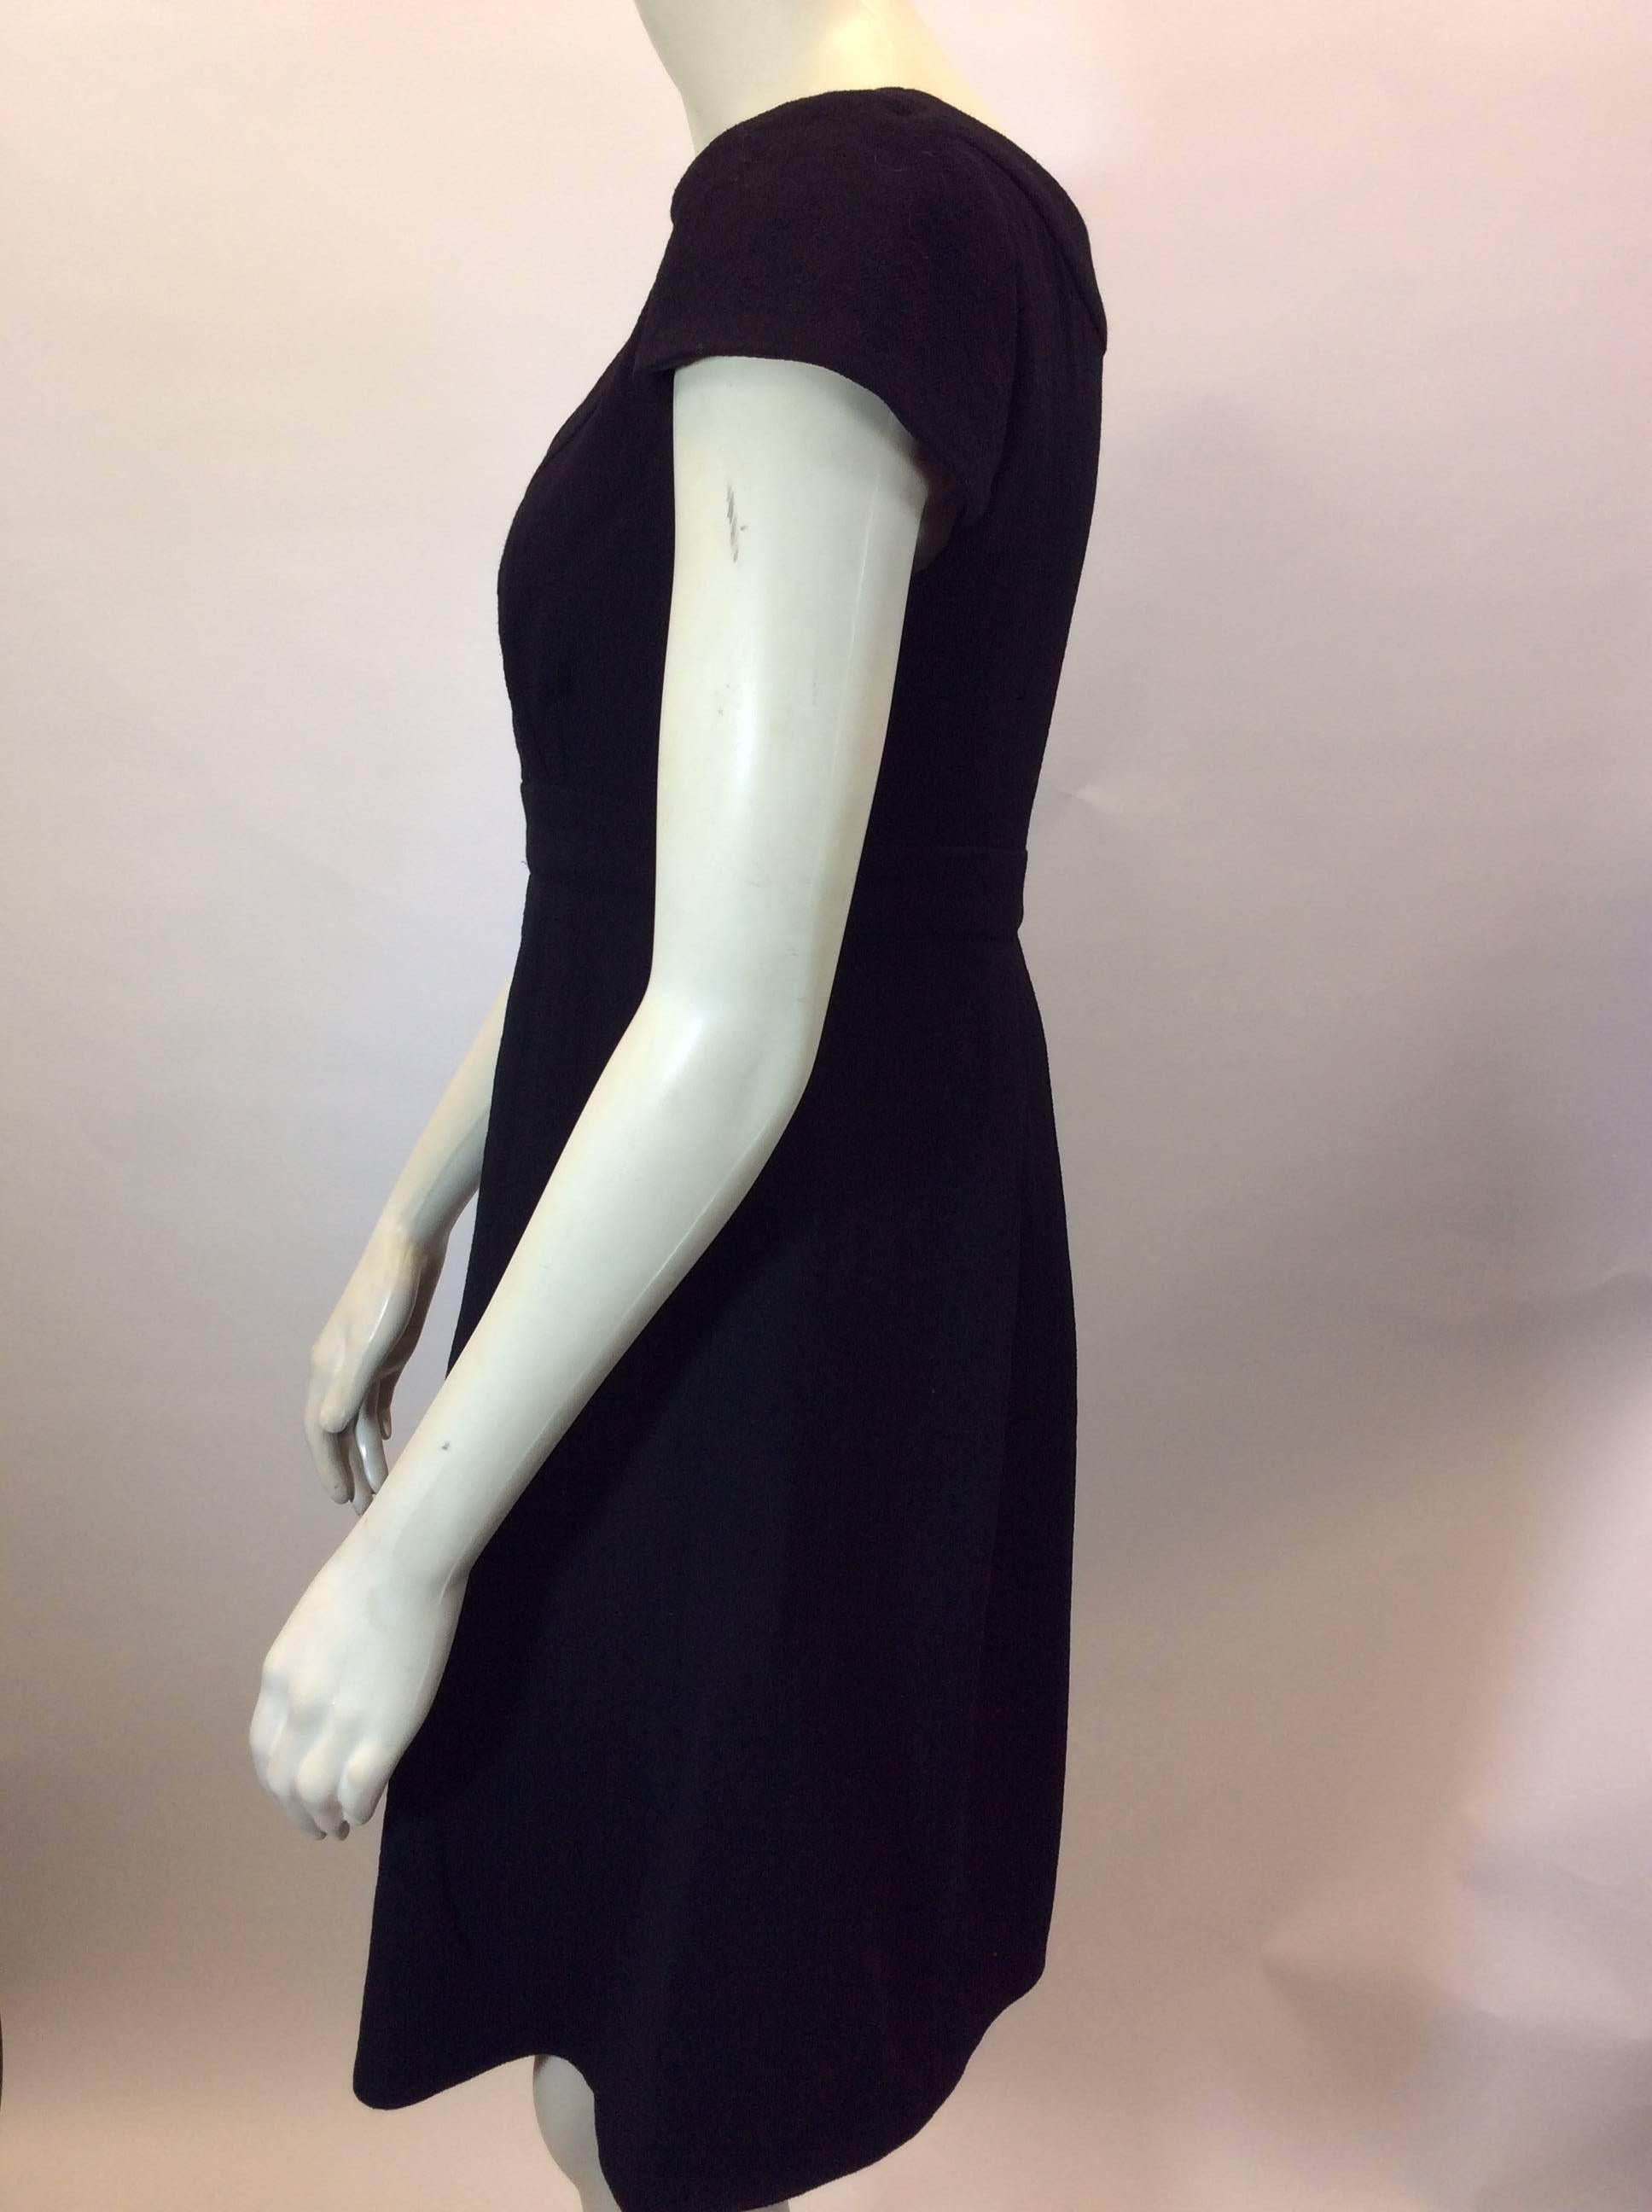 Armani Black Pleated Cocktail Dress In Excellent Condition For Sale In Narberth, PA